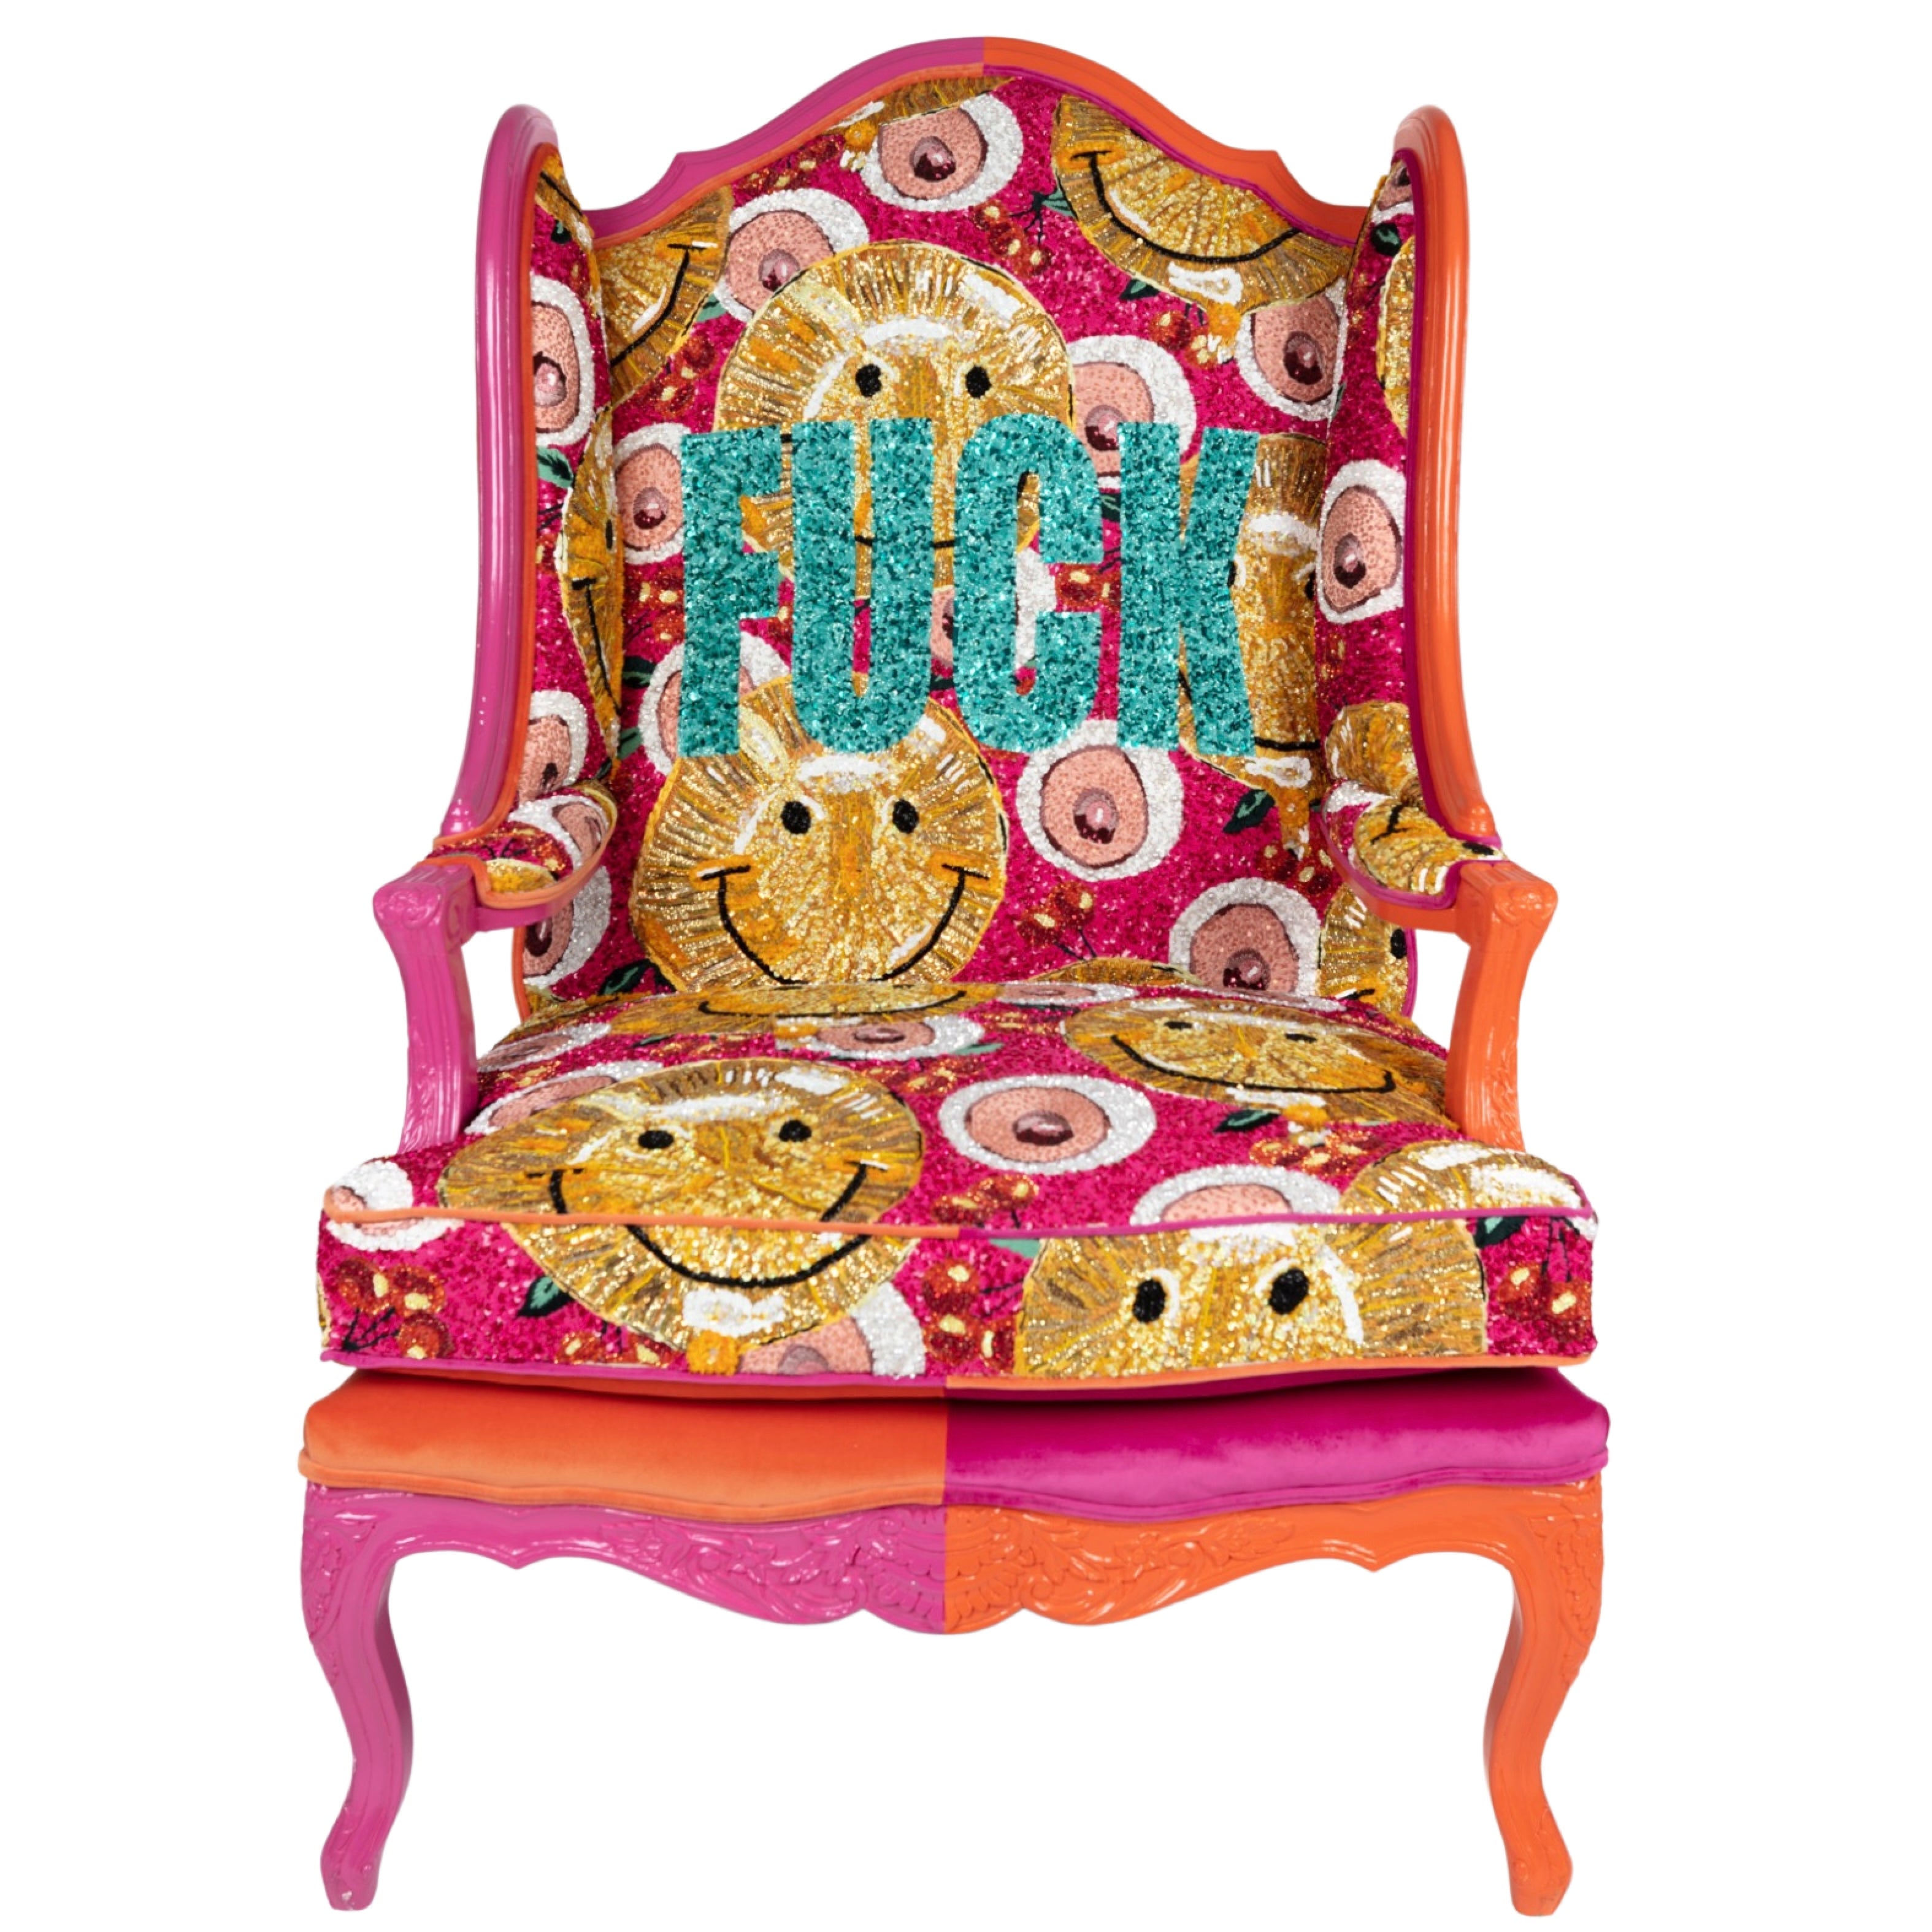 "FUCK" Embroidered and Embellished Chair